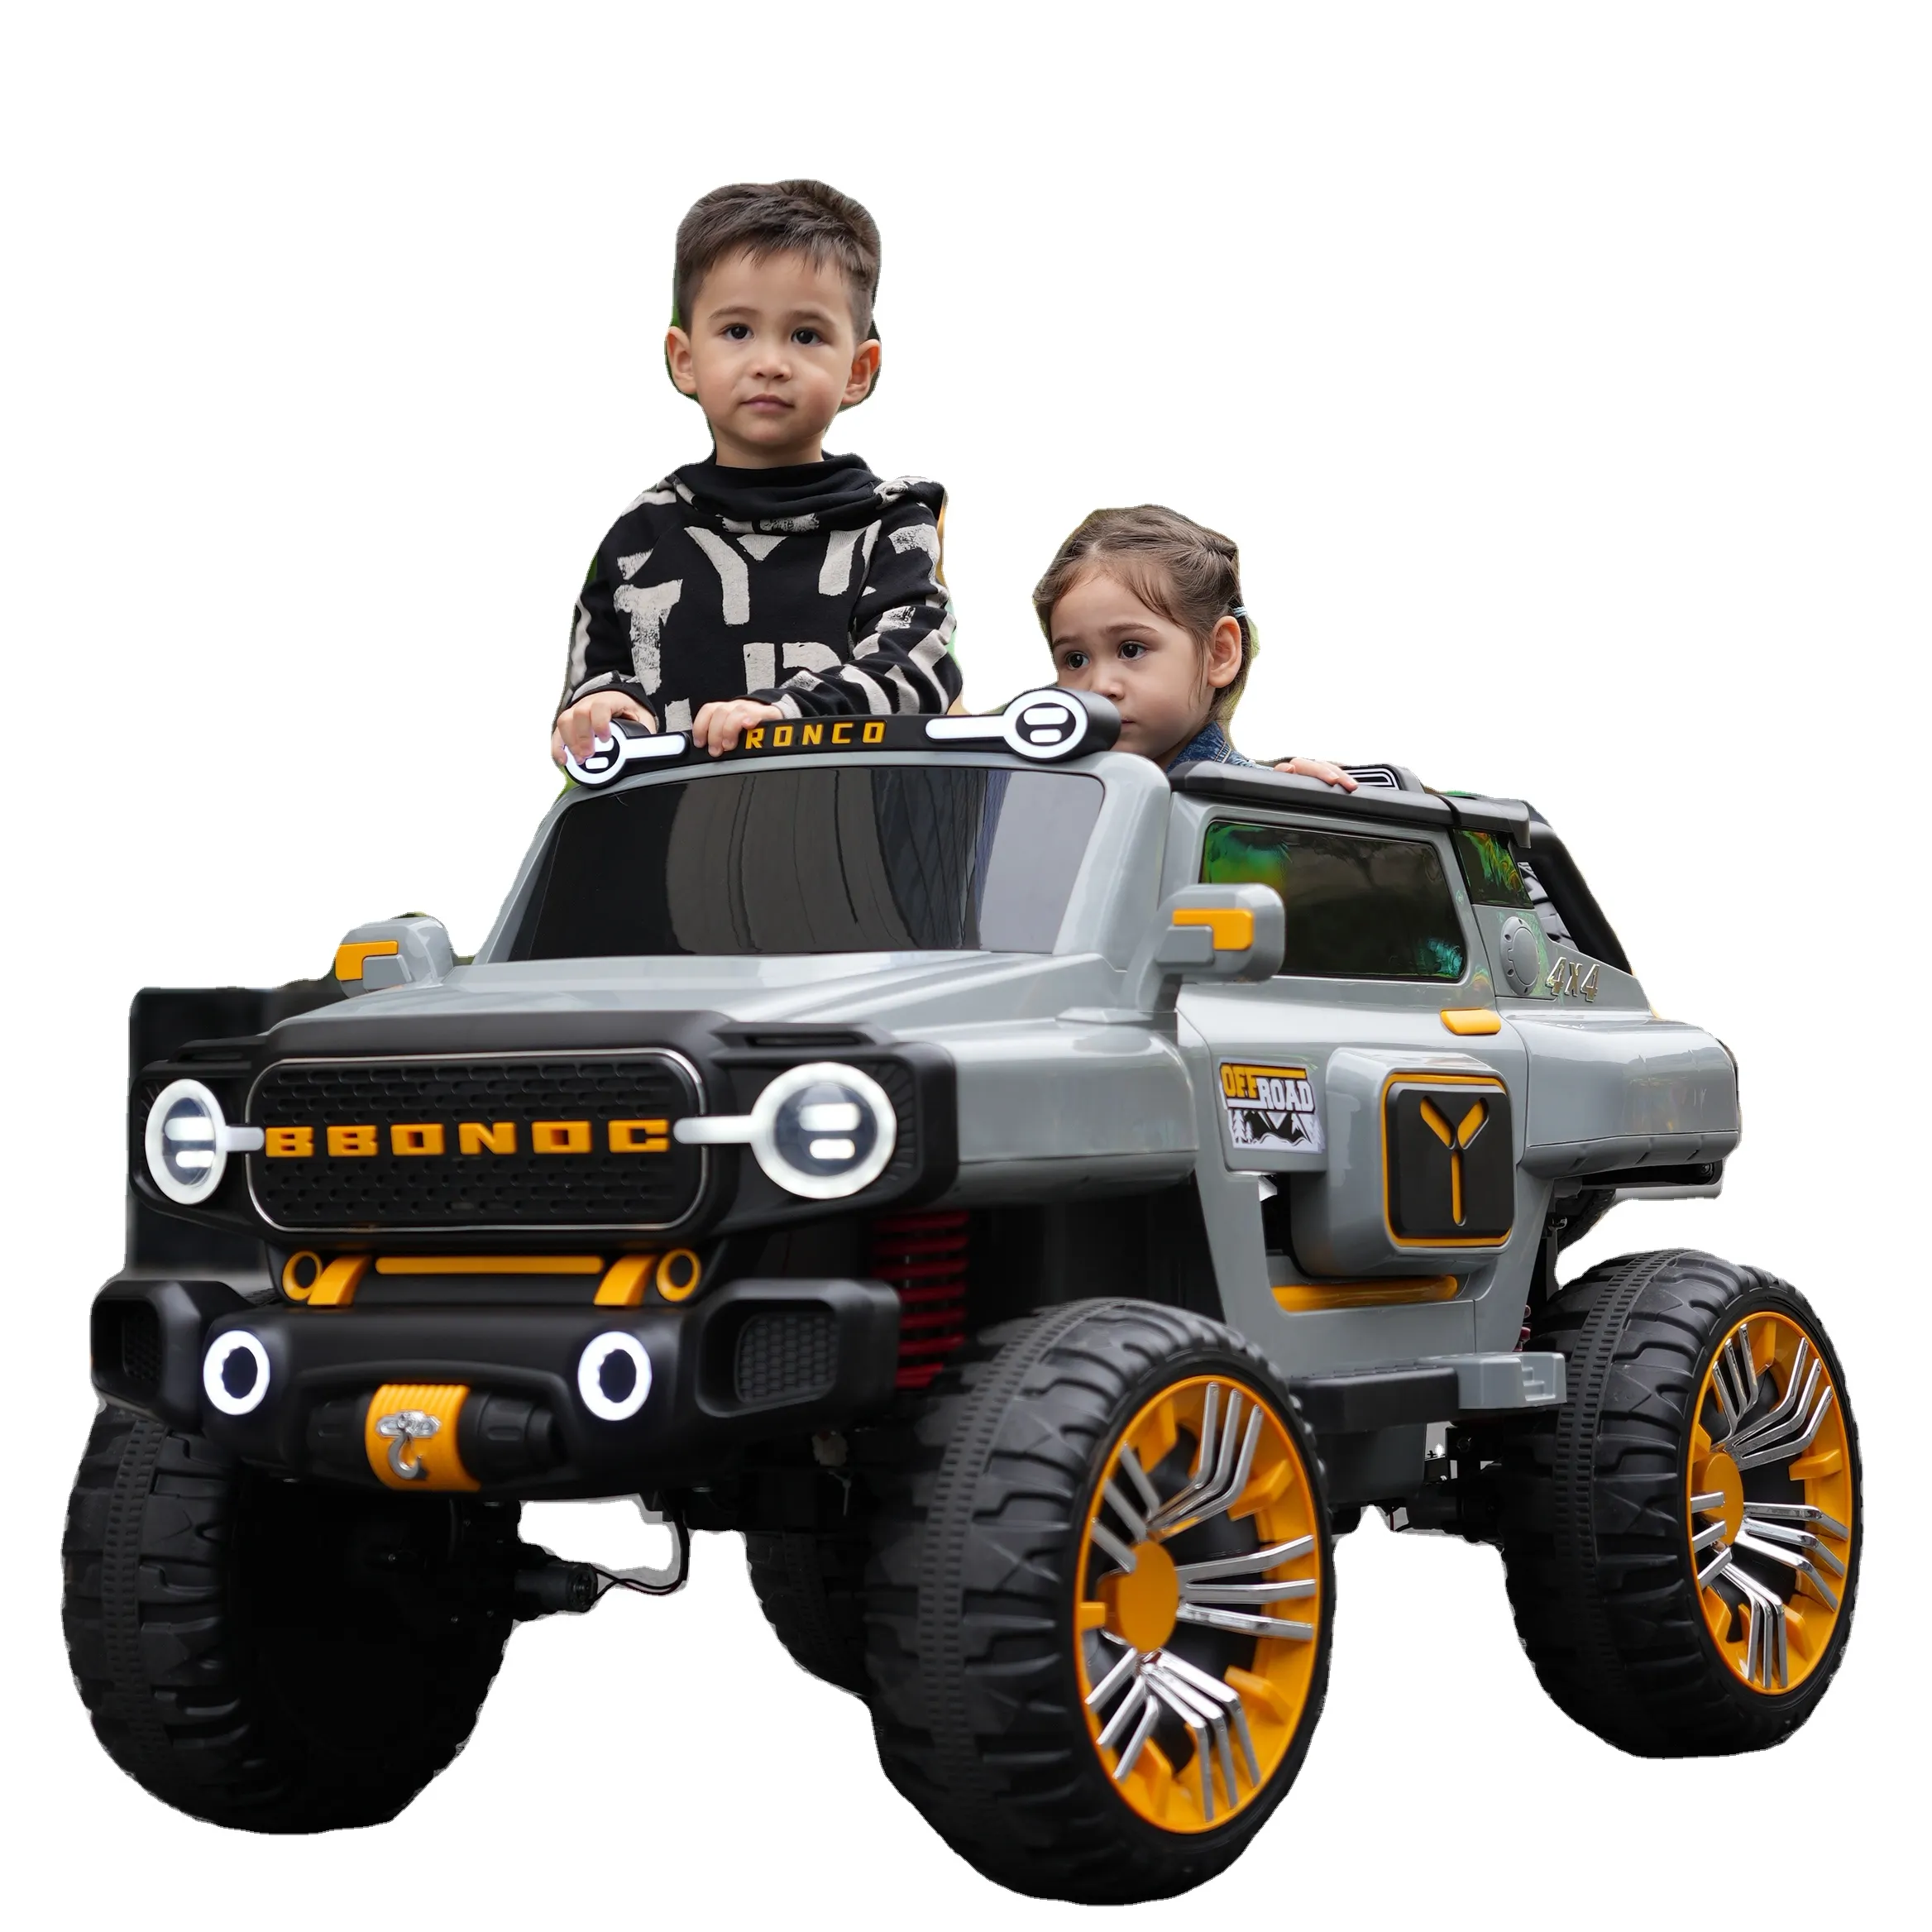 kids electric cars for 12 year old/kids car electric female/wholesale popular baby toys car big kids electric battery ride